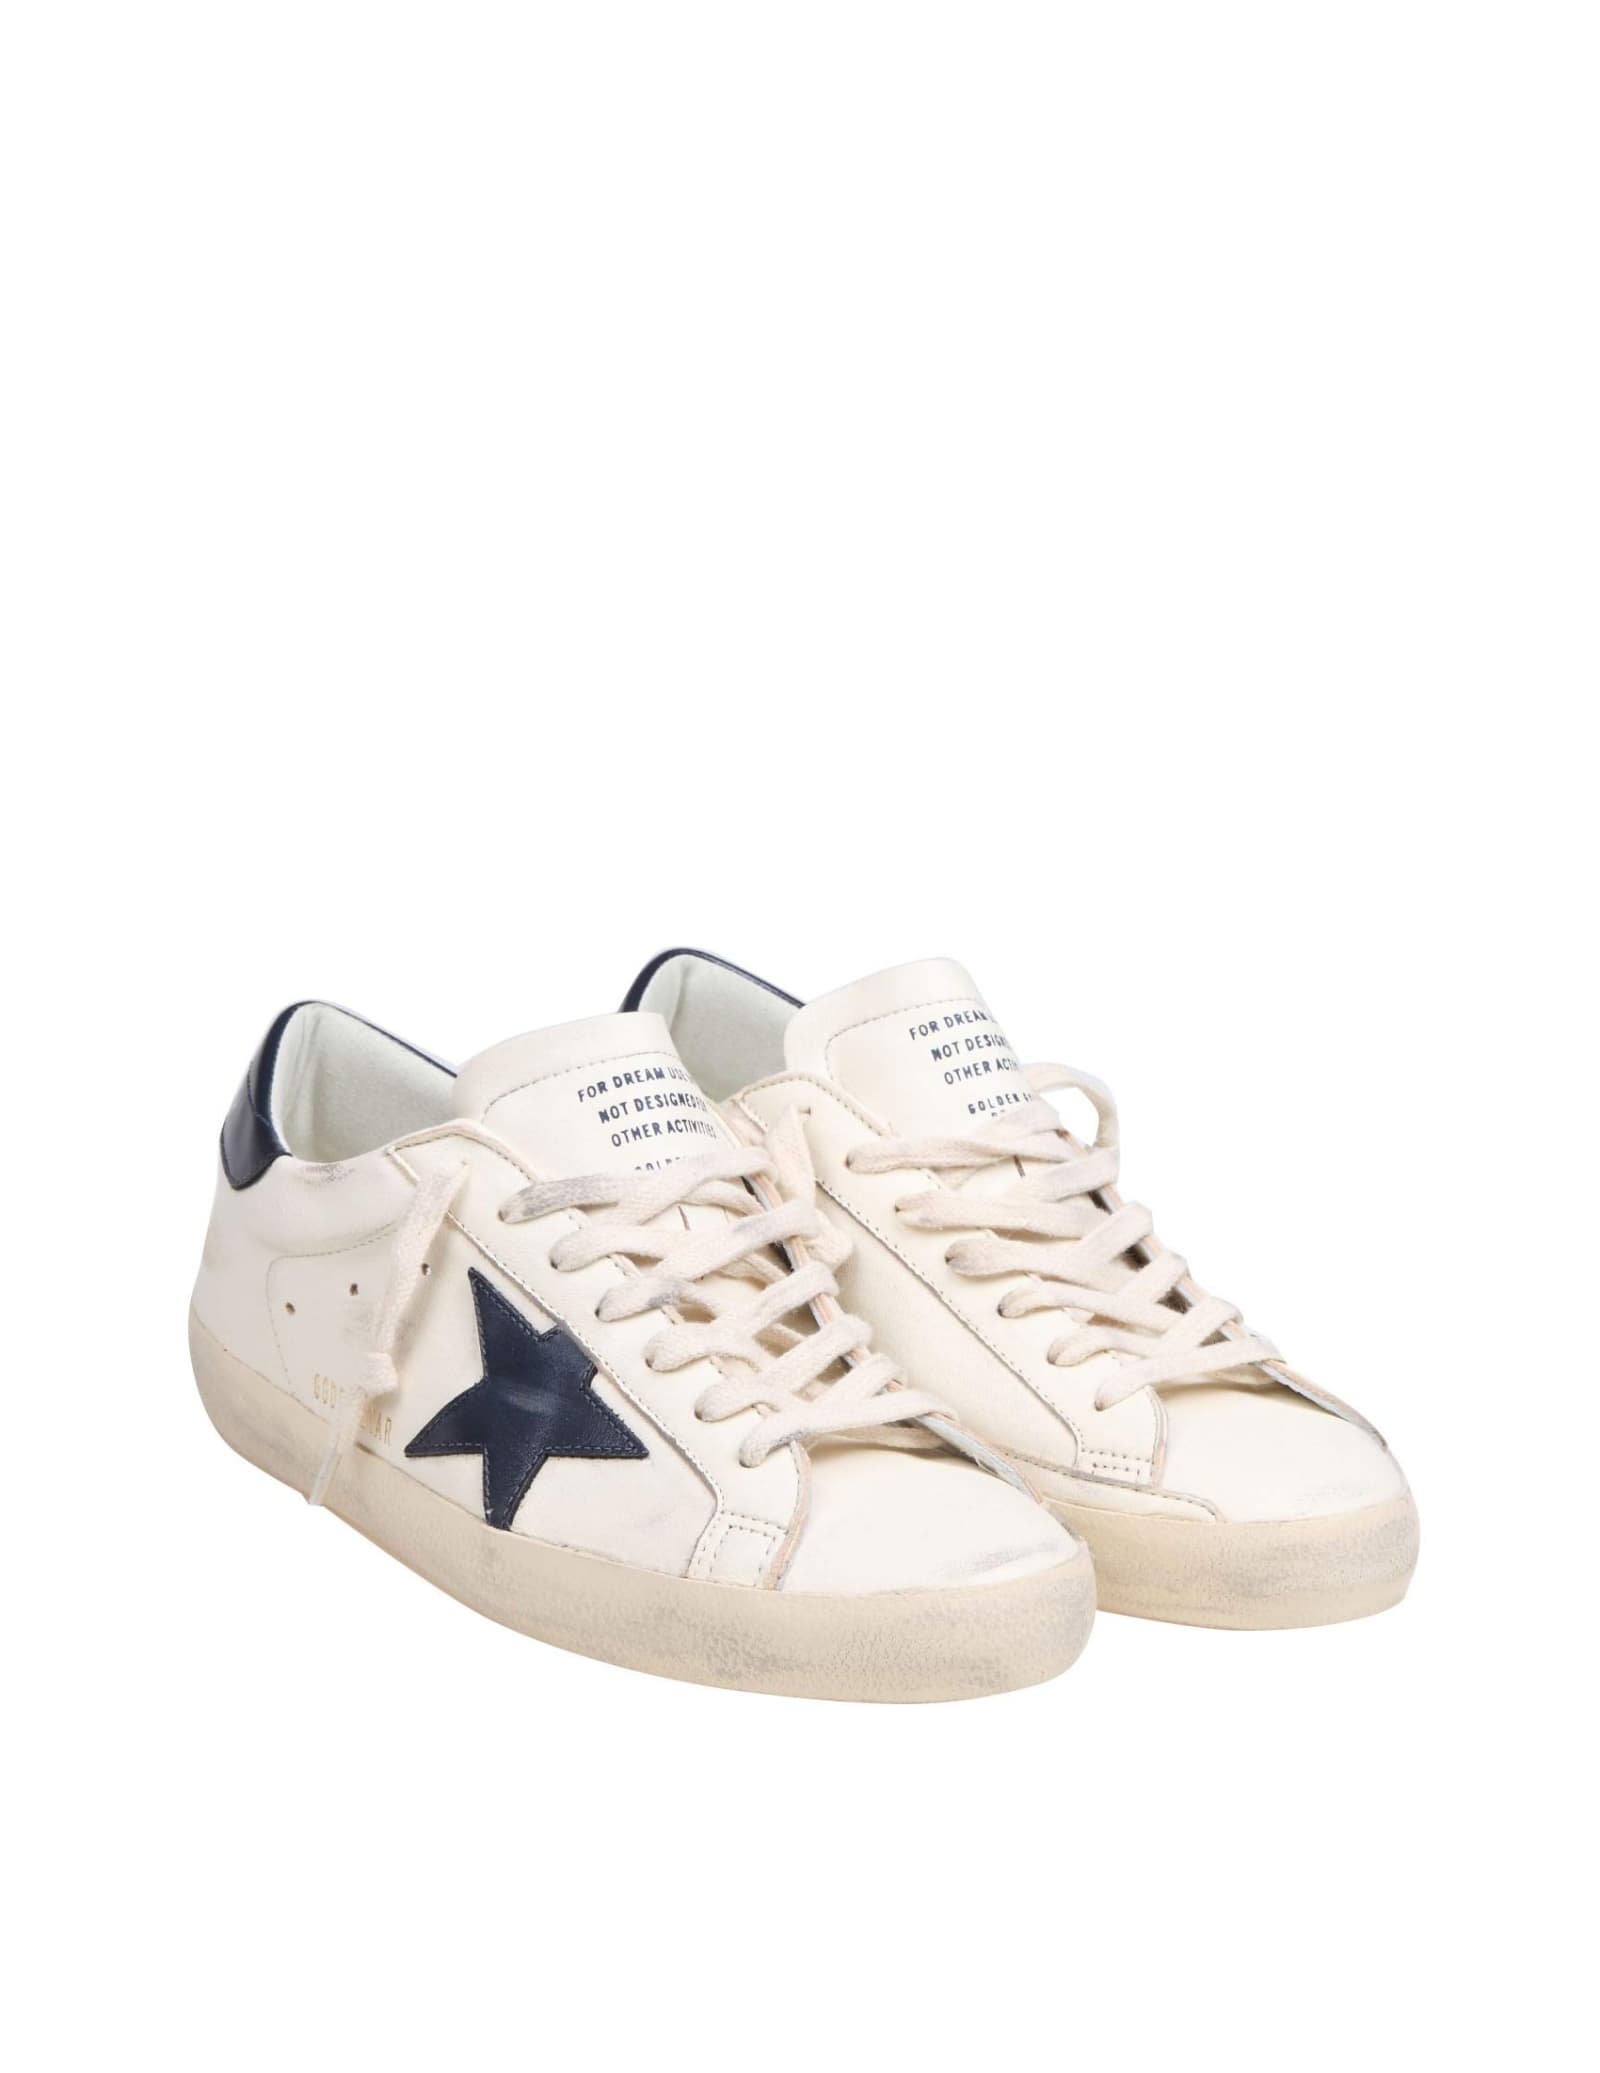 Shop Golden Goose Super-star Sneakers In Beige And Midnight Blue Leather In Beige/blue